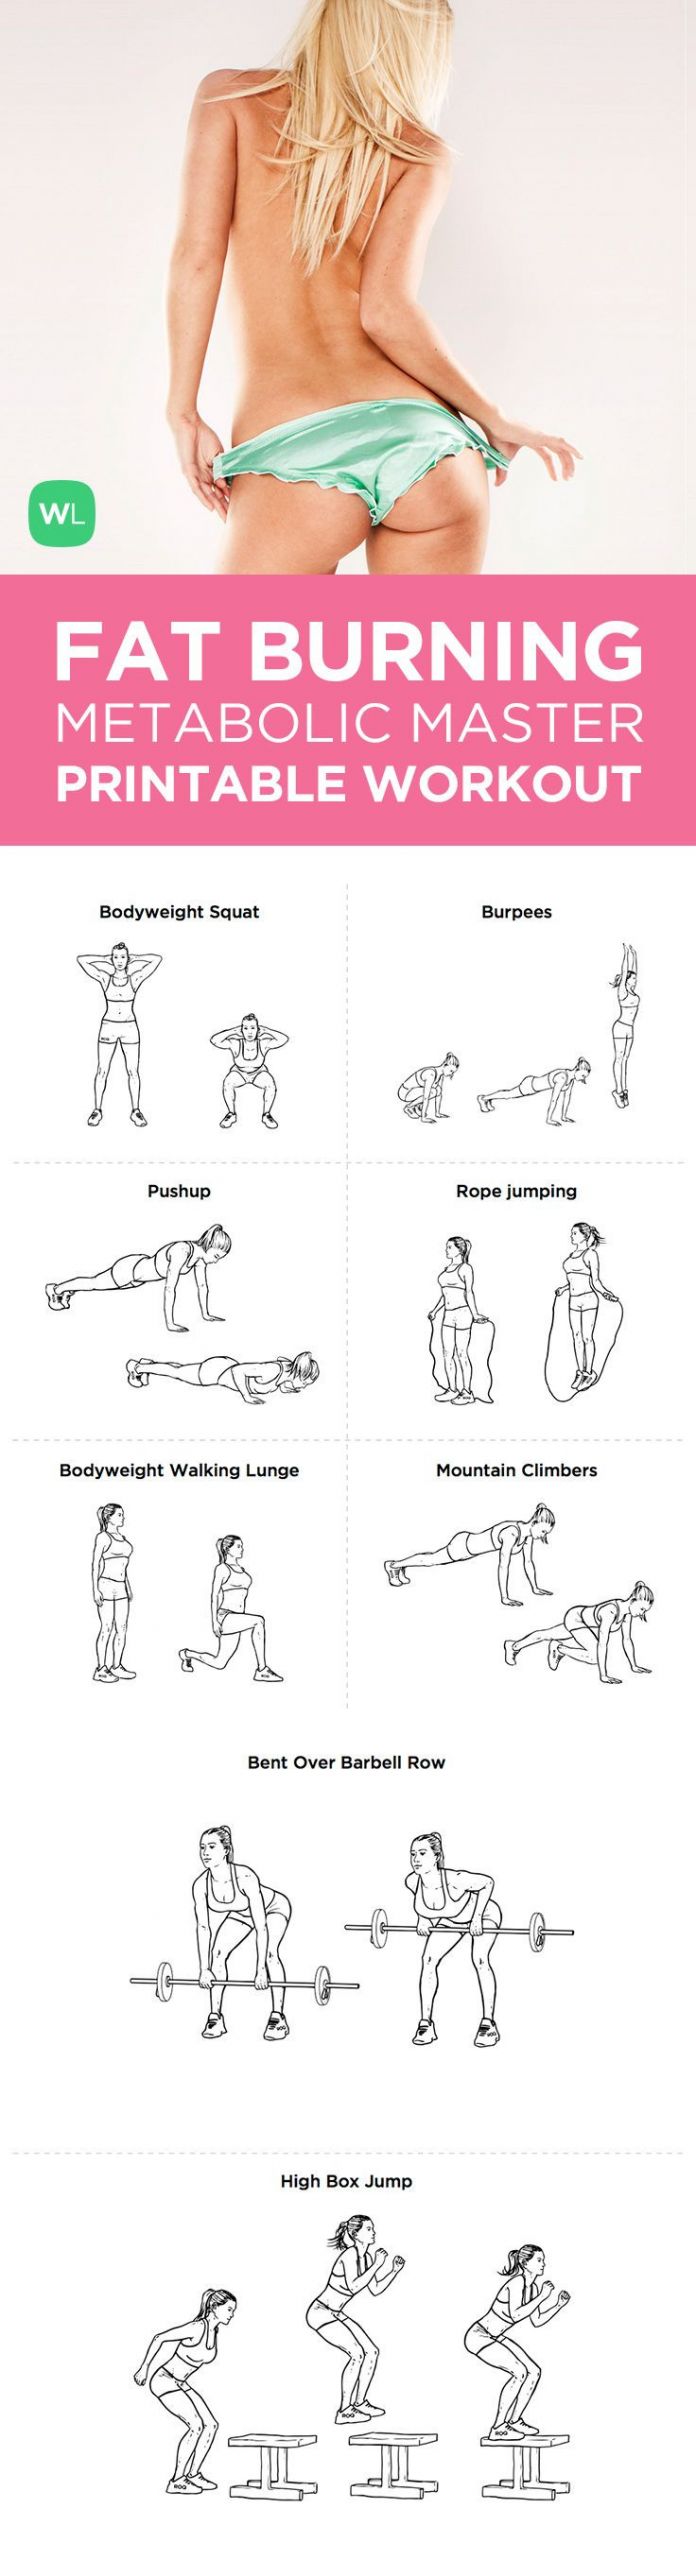 Fat Burning Workout With Weights
 Fat Burning Workout Fitness